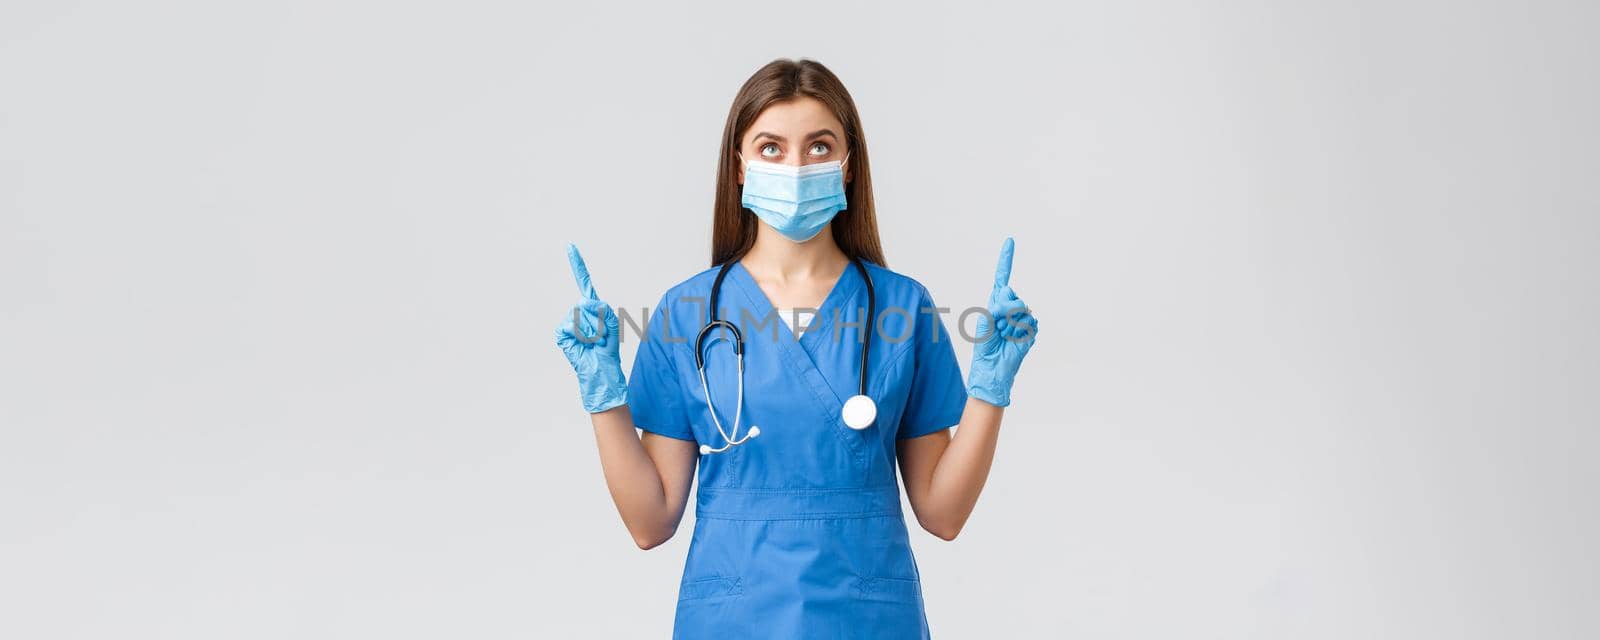 Covid-19, preventing virus, health, healthcare workers and quarantine concept. Curious female doctor or nurse in blue scrubs, medical mask reading banner, pointing fingers up.